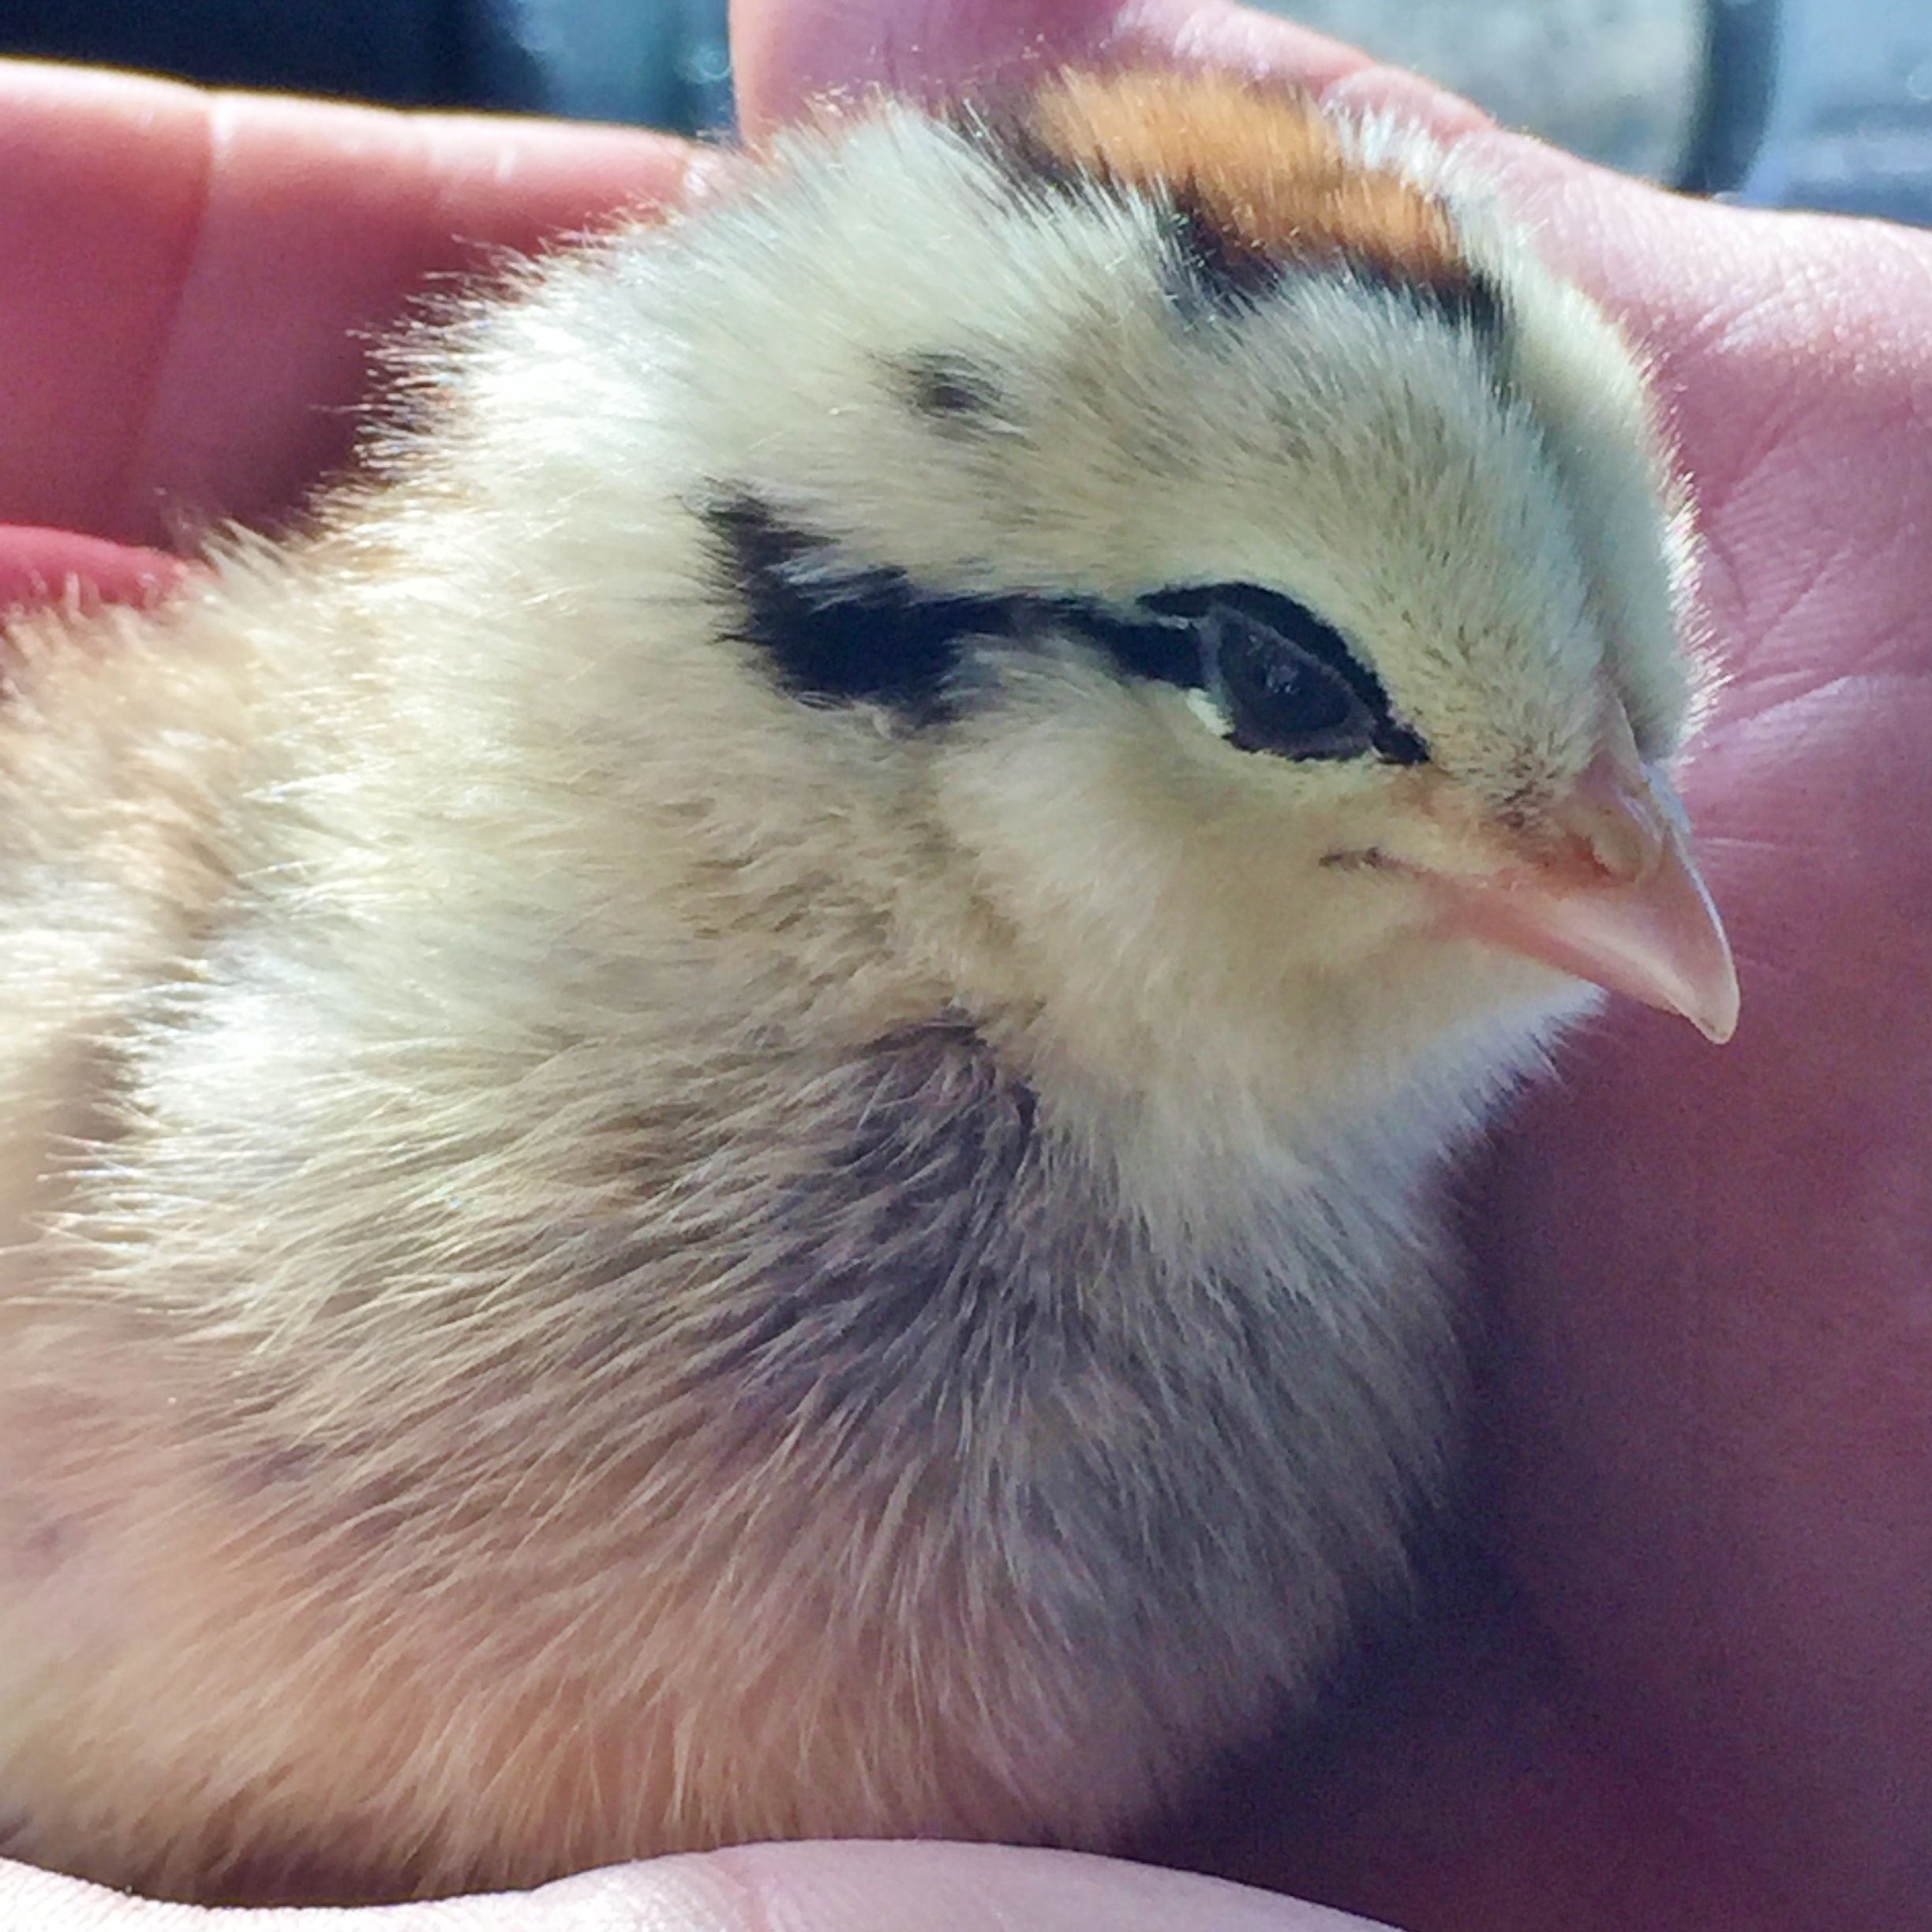 This baby chick was adopted by a Swansons employee